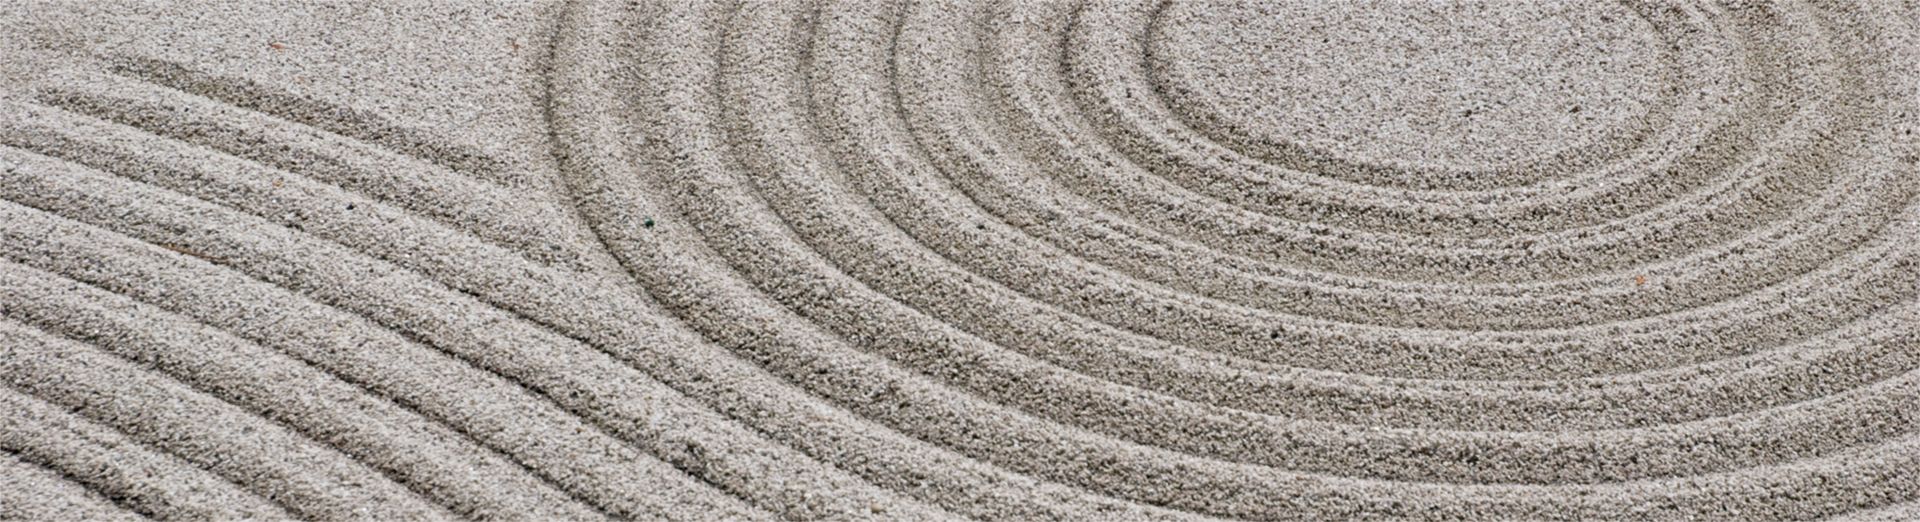 Lines in sand depicting a large circle.